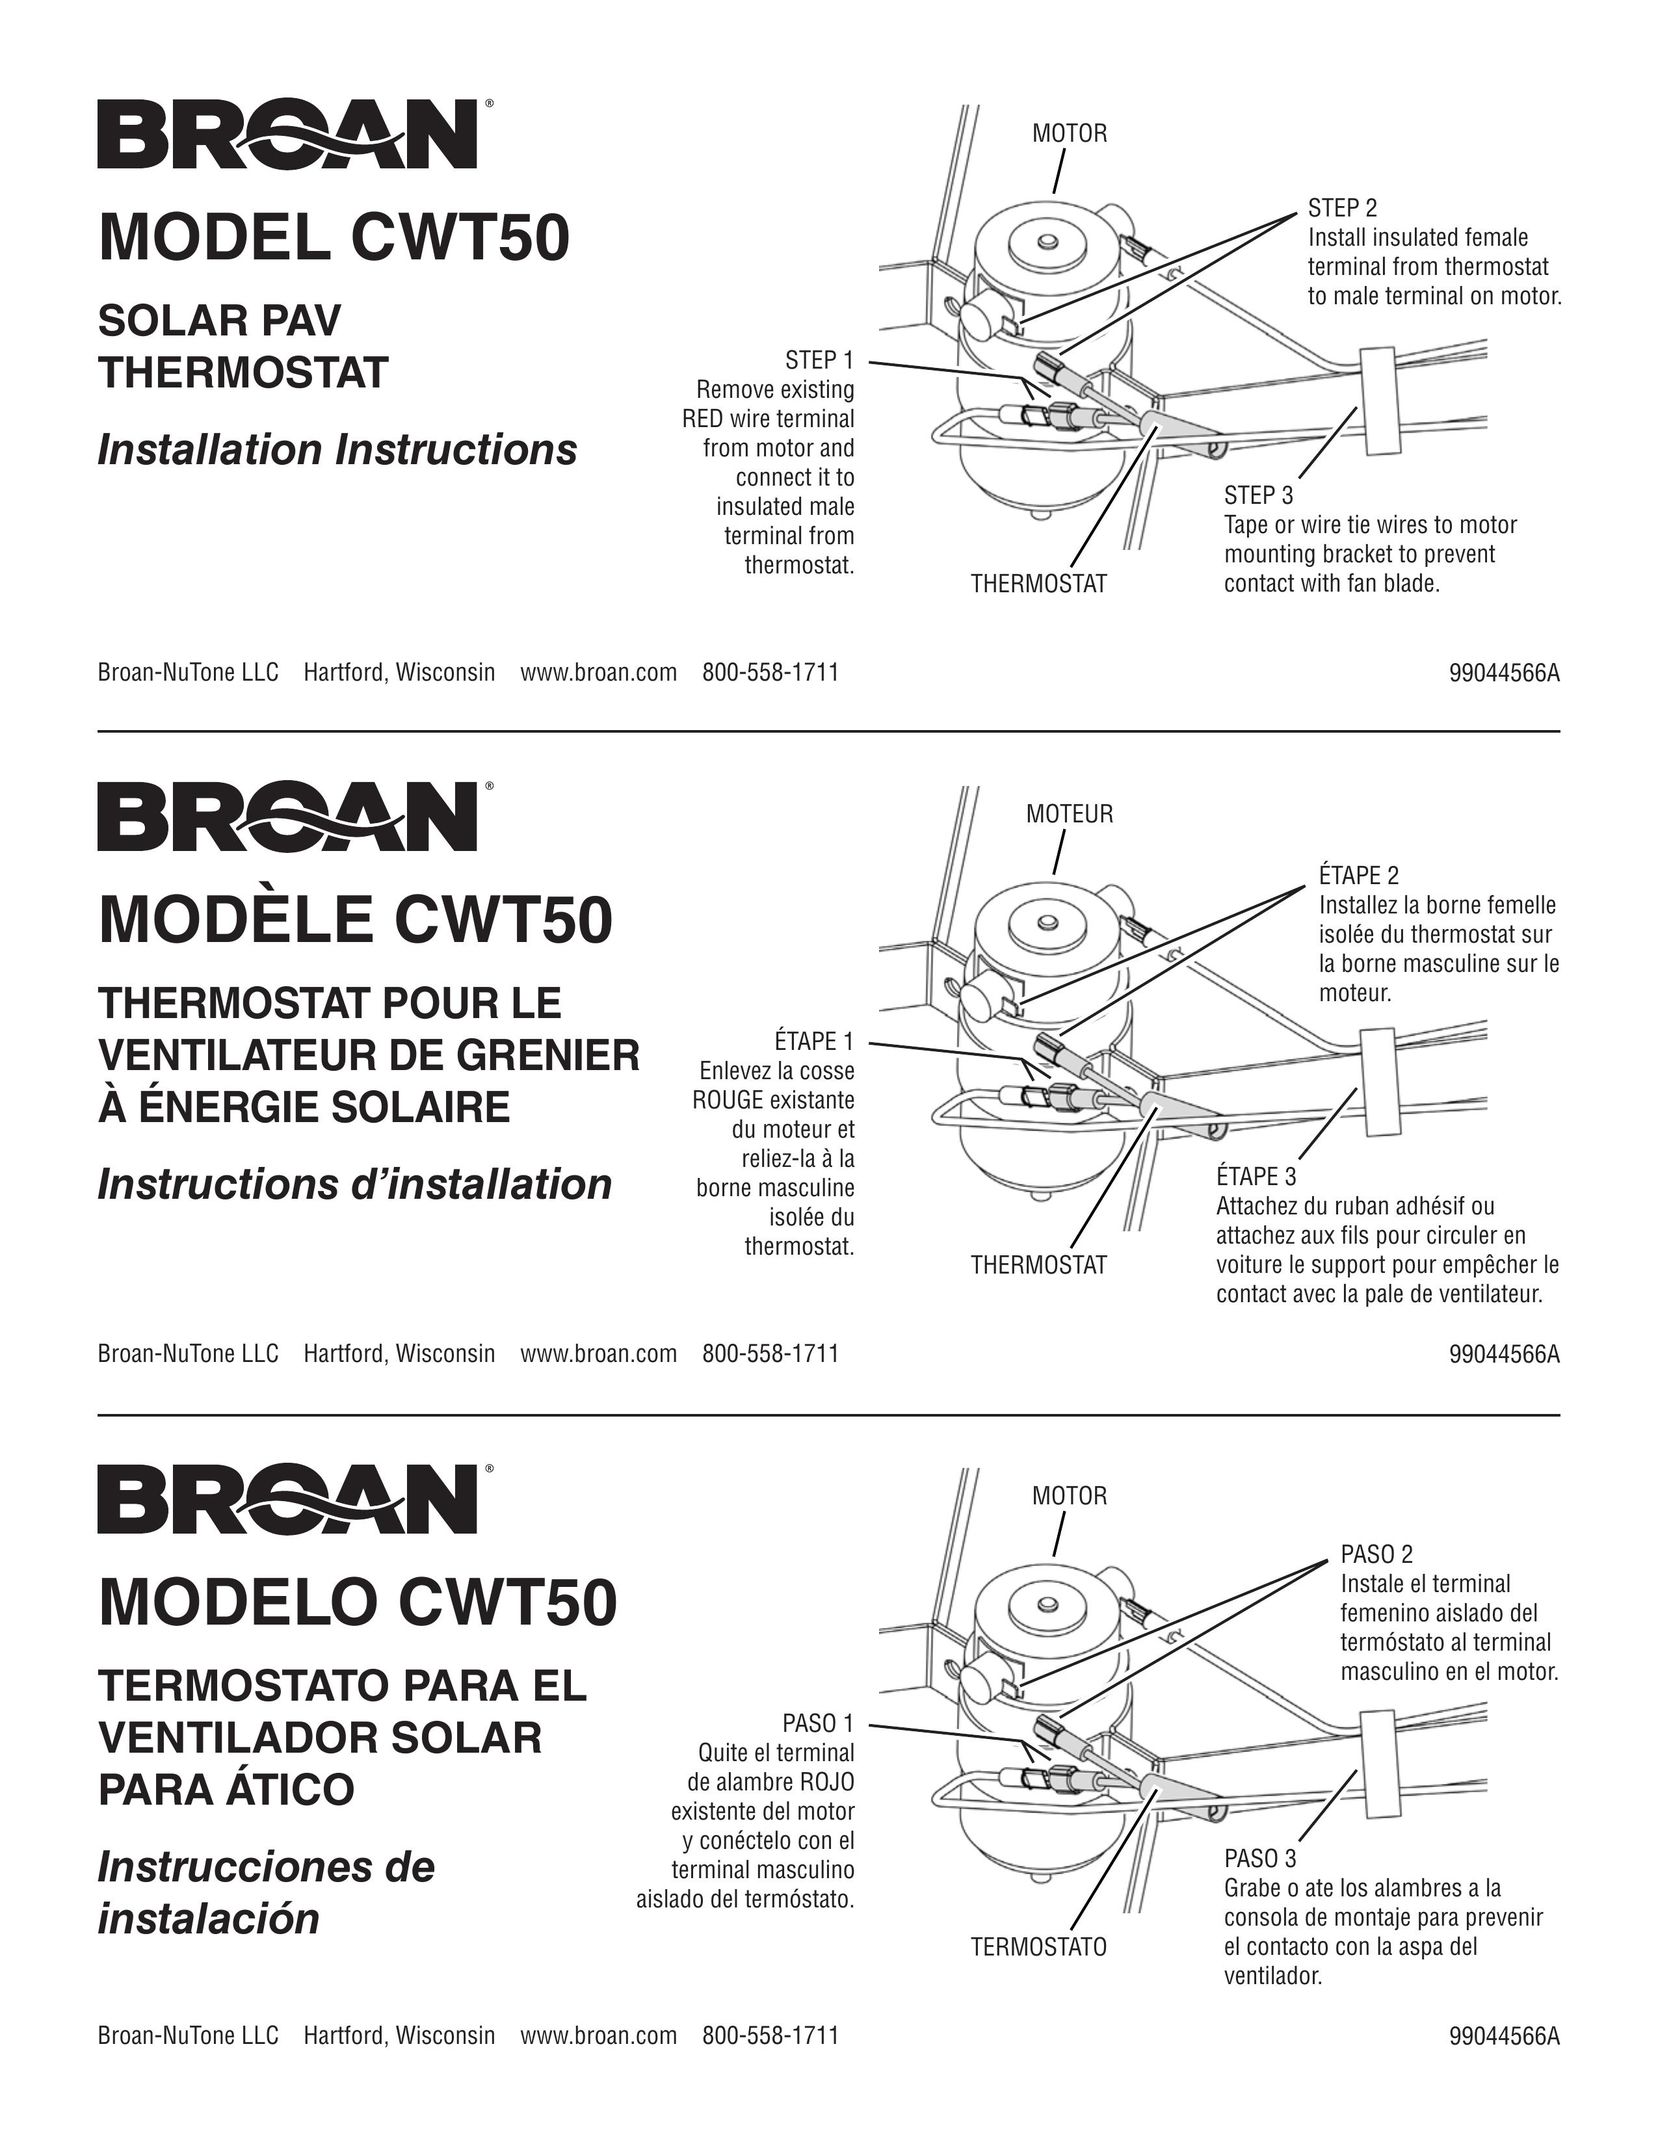 Broan CWT50 Thermostat User Manual